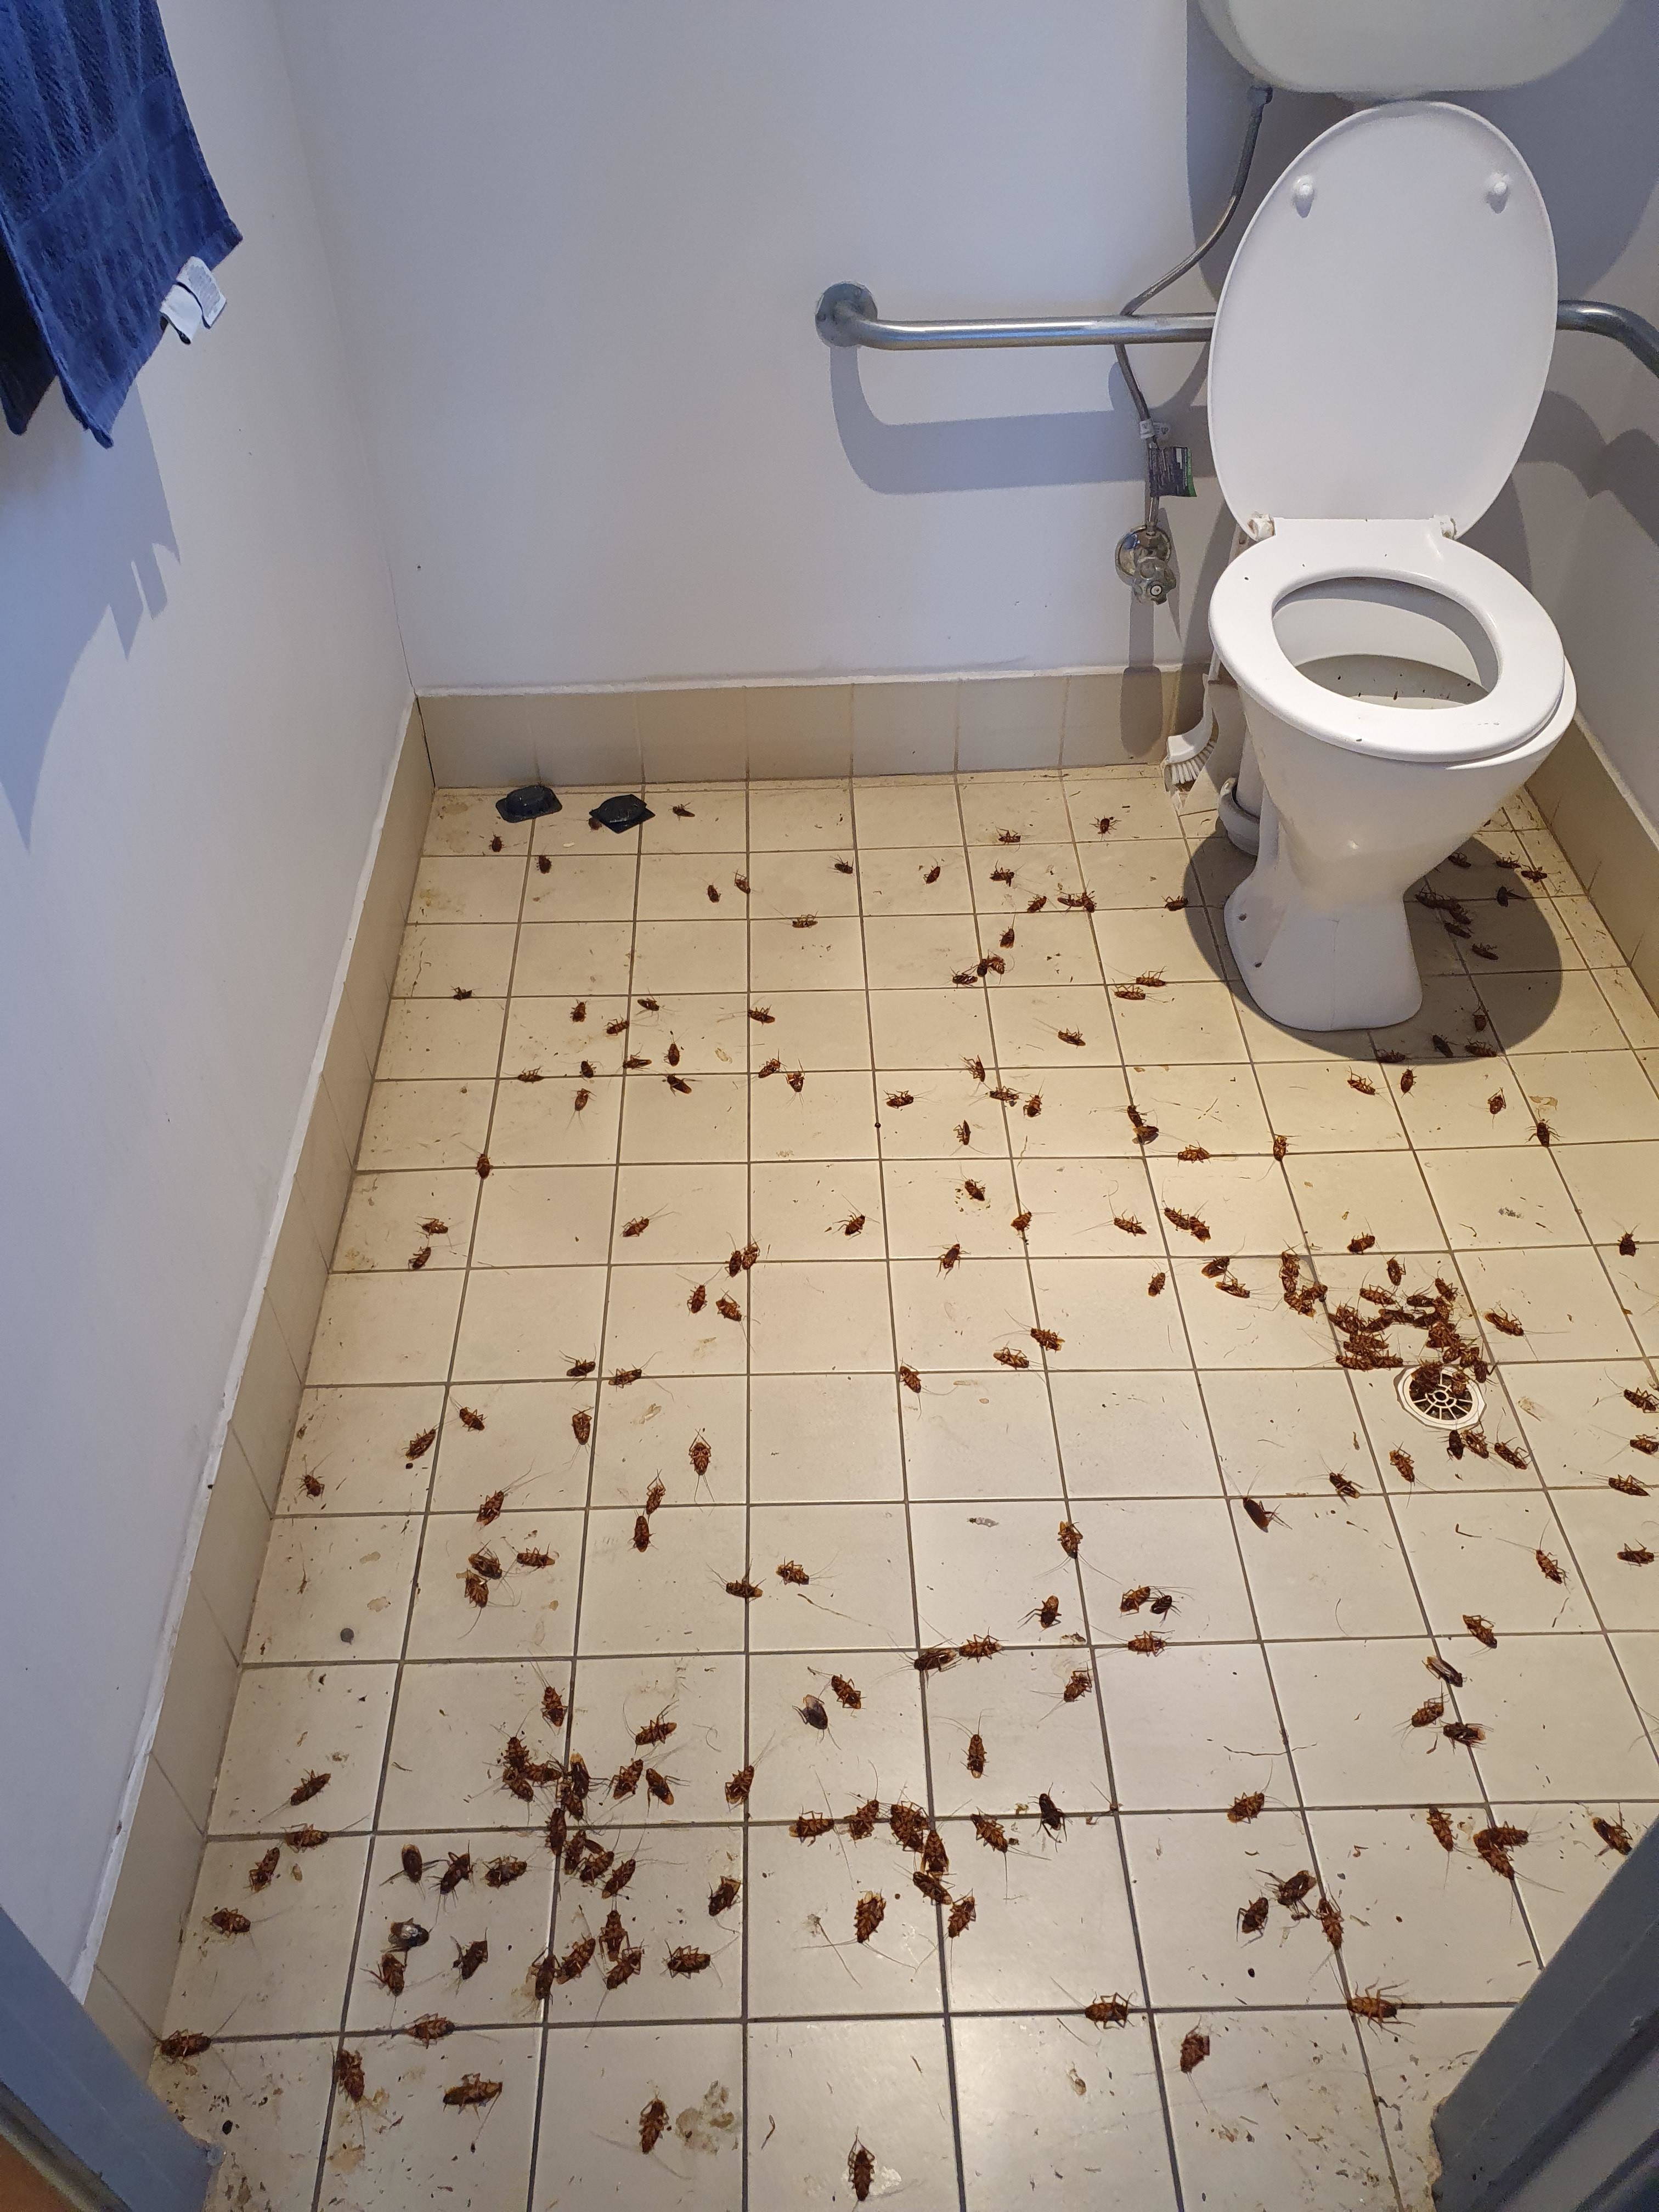 Bathroom floor and toilet with scattered dead roaches, needing cleaning